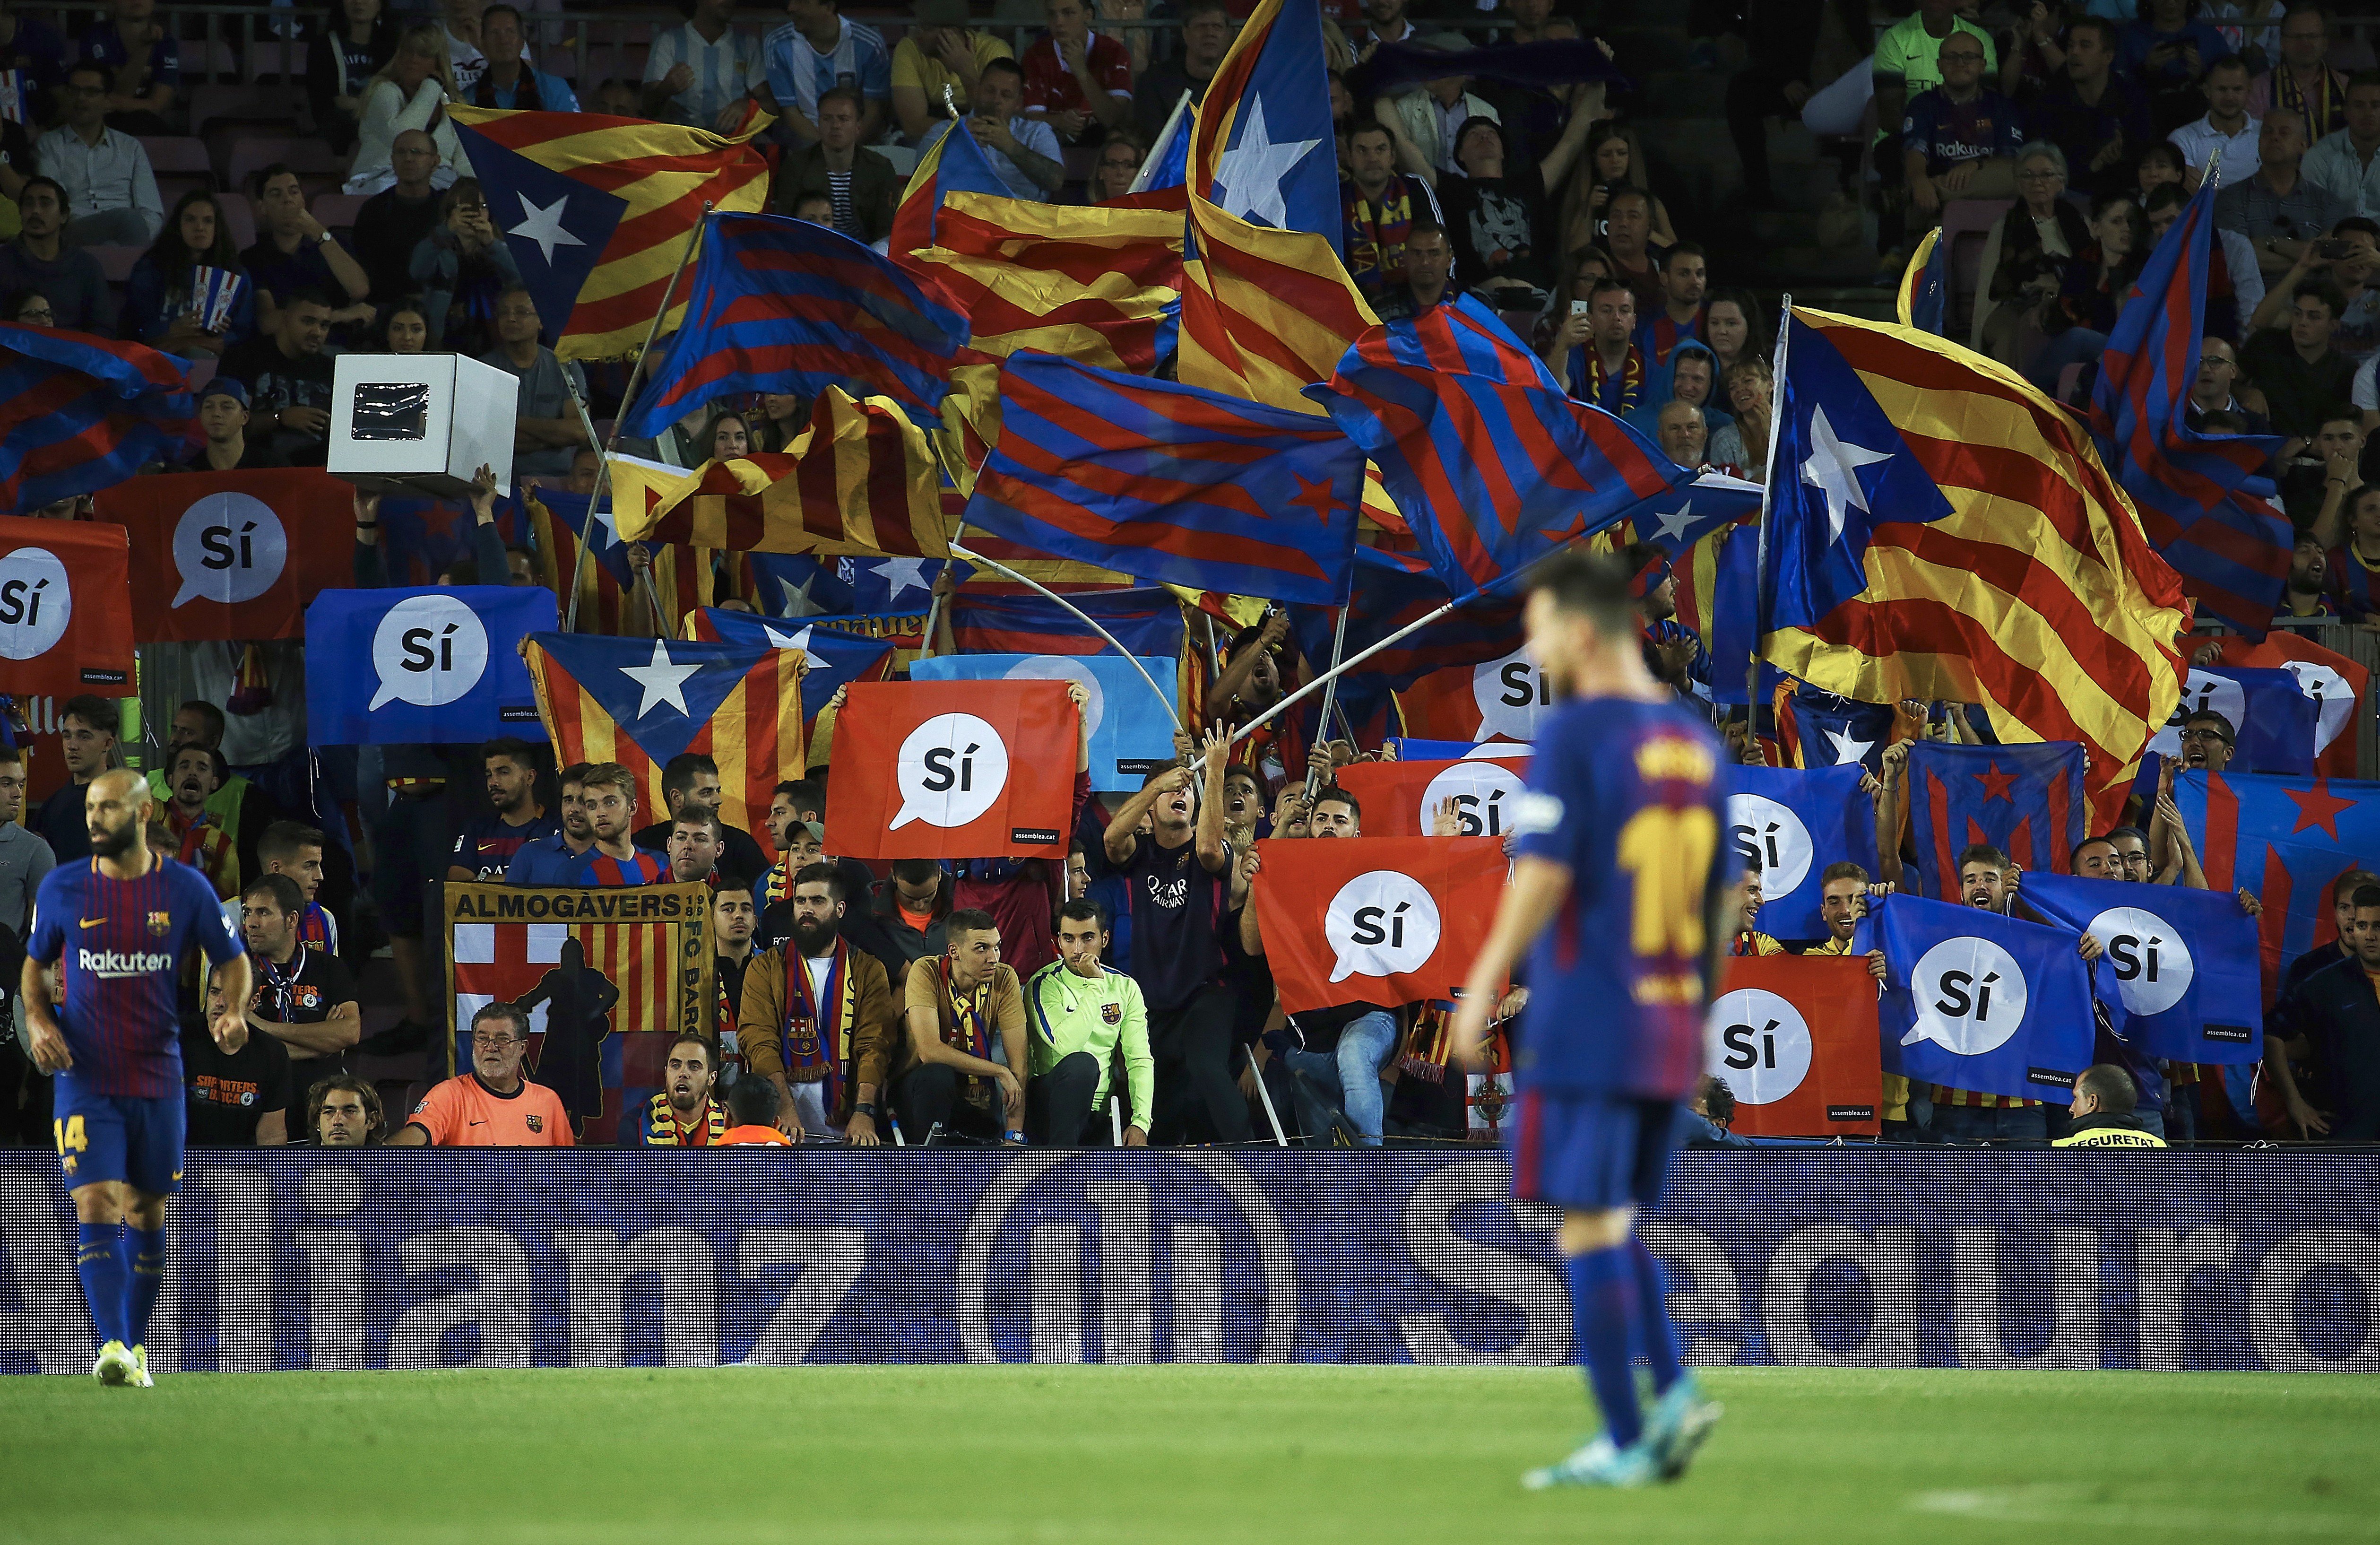 Thousands of Spanish flags but no 'estelades' to be at La Liga match in US